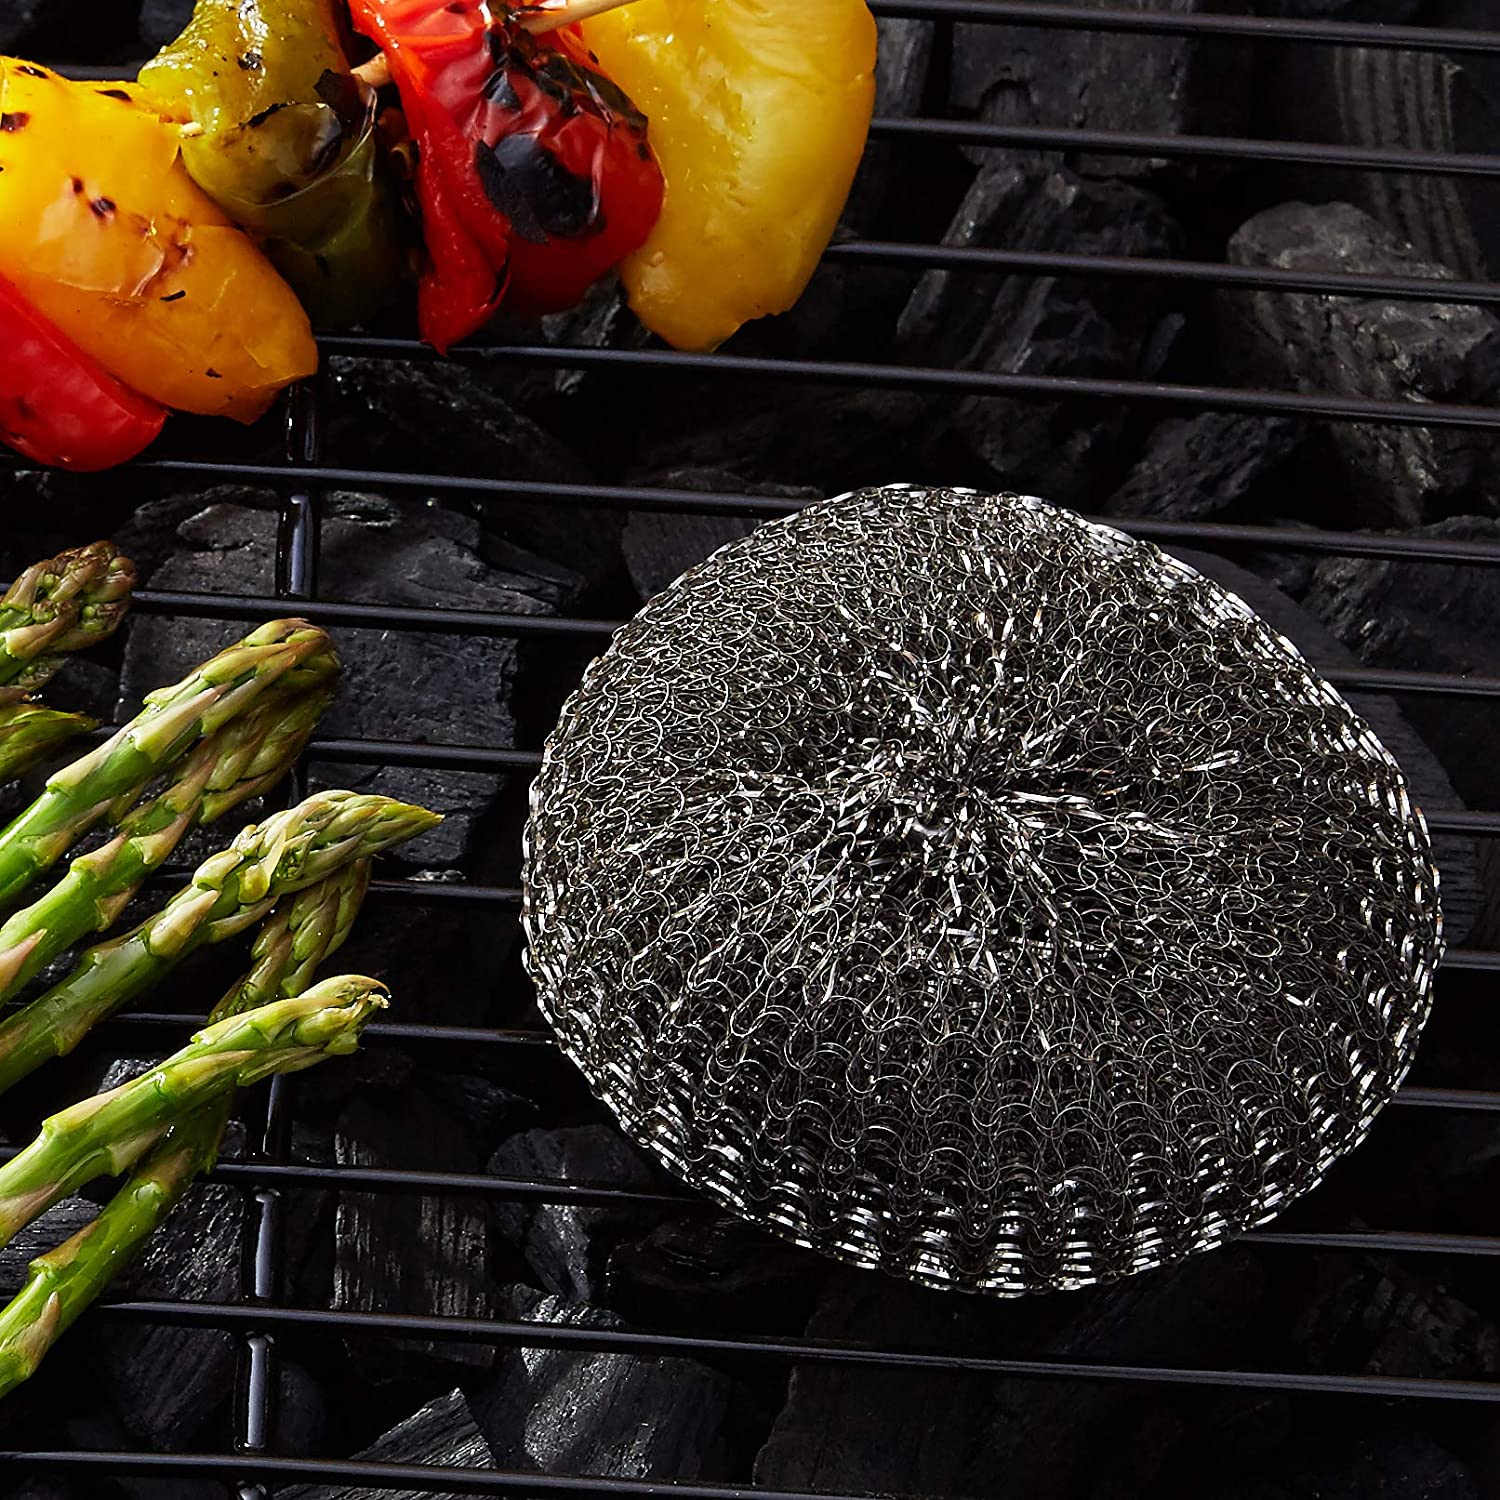 Outset Replacement Mesh Scrubbers Placed on the Grill with Asparagus and Veggies